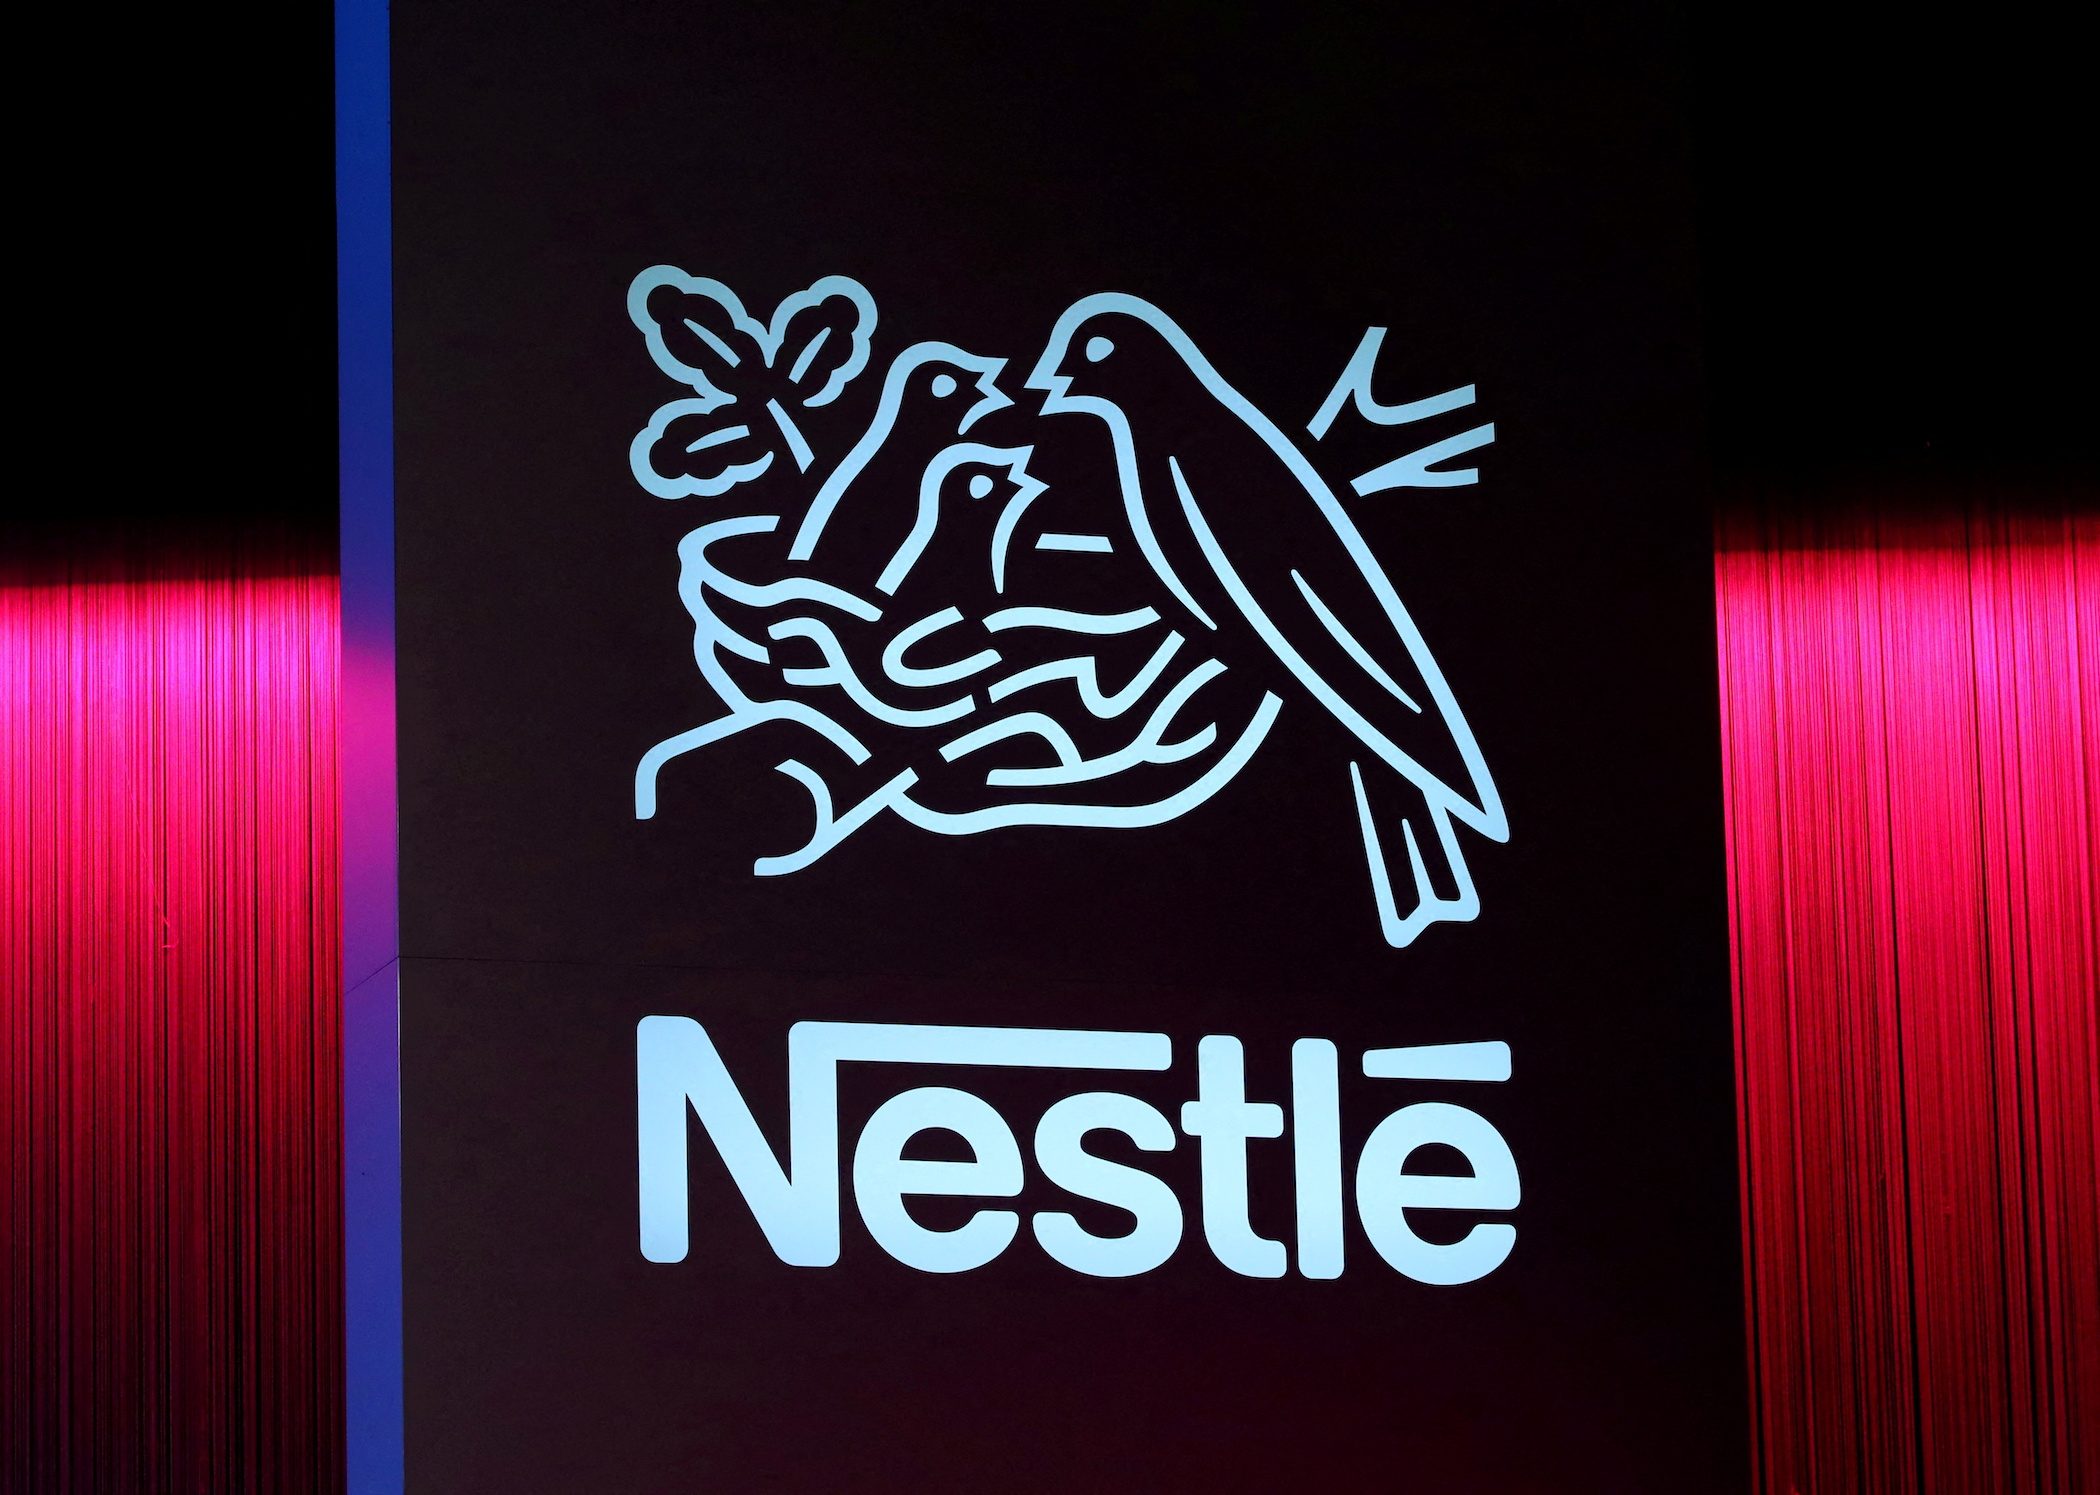 Nestle revamps coffee sustainability plan as climate challenges mount